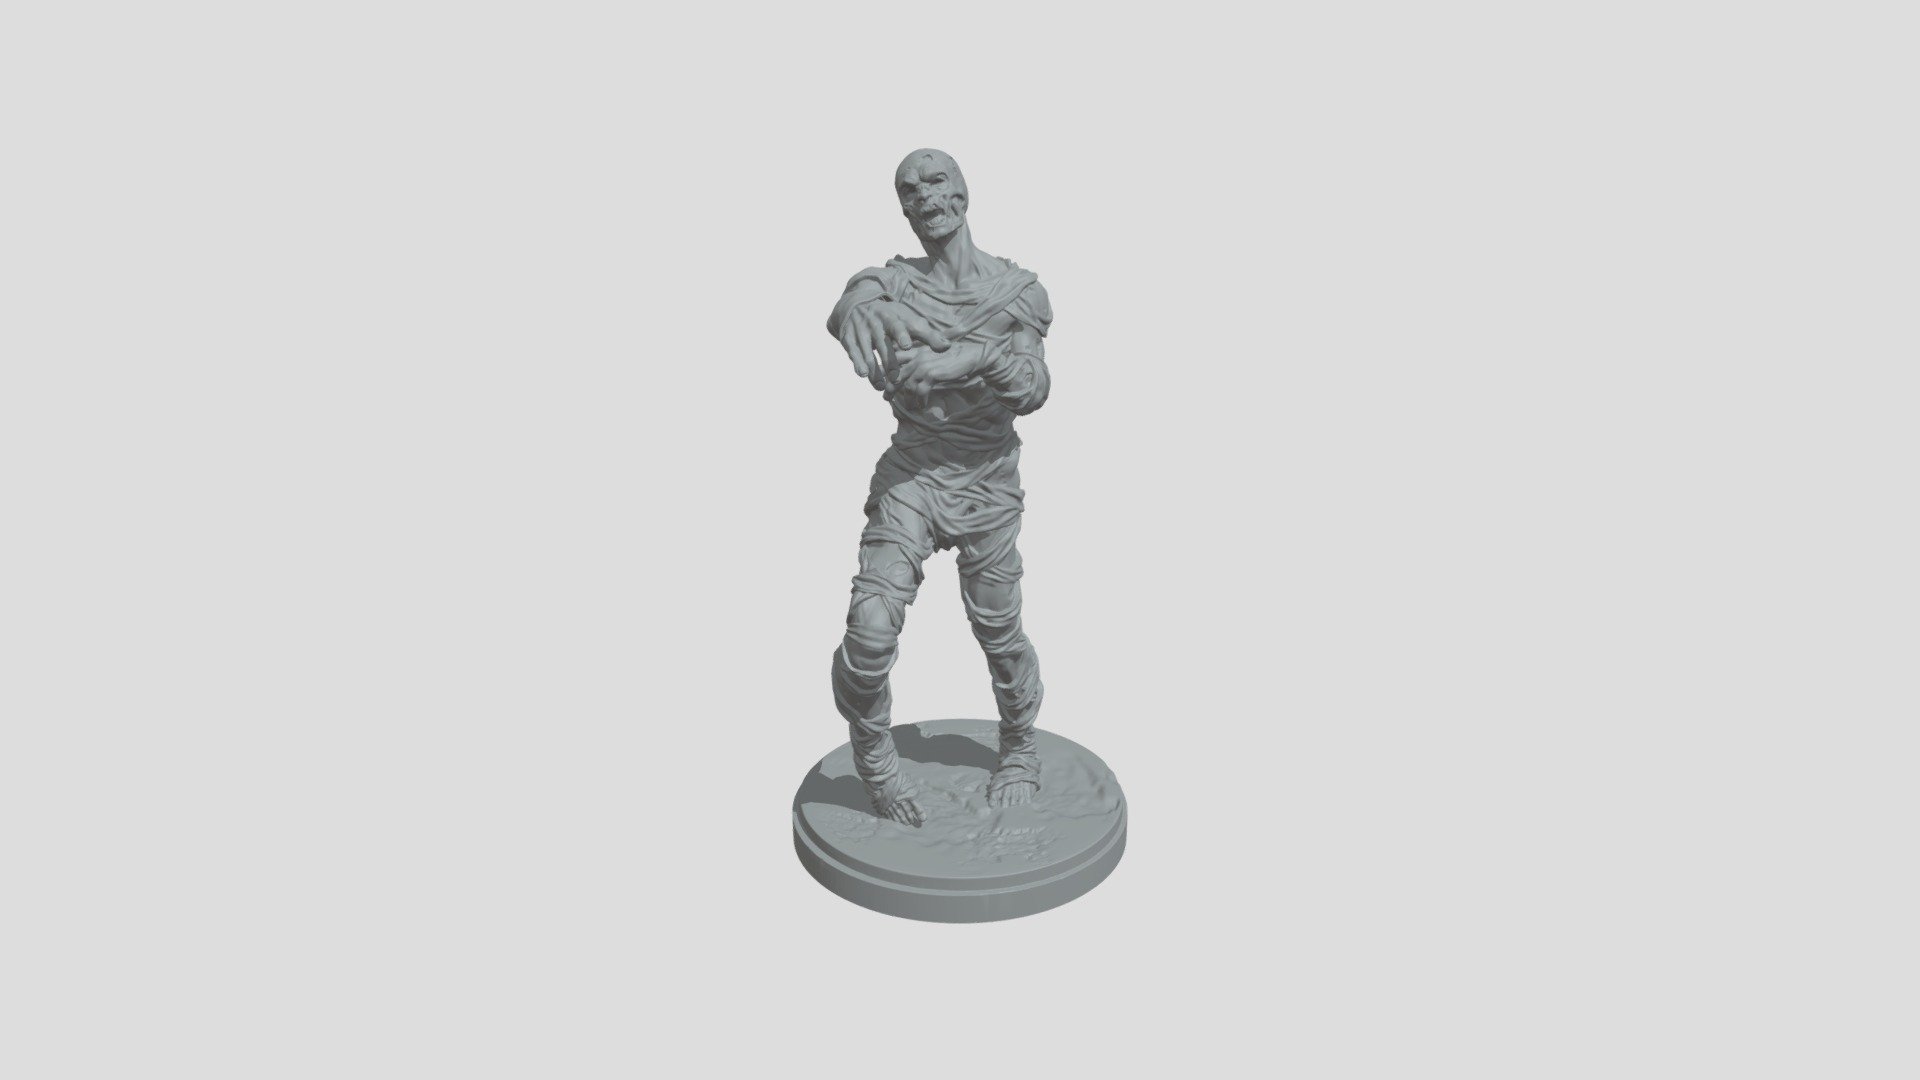 Initially I wanted to make a miniature out of this but I haven't managed to get the scale right. This will make a nice desk ornament &lsquo;tho if printed in a bigger scale 3d model